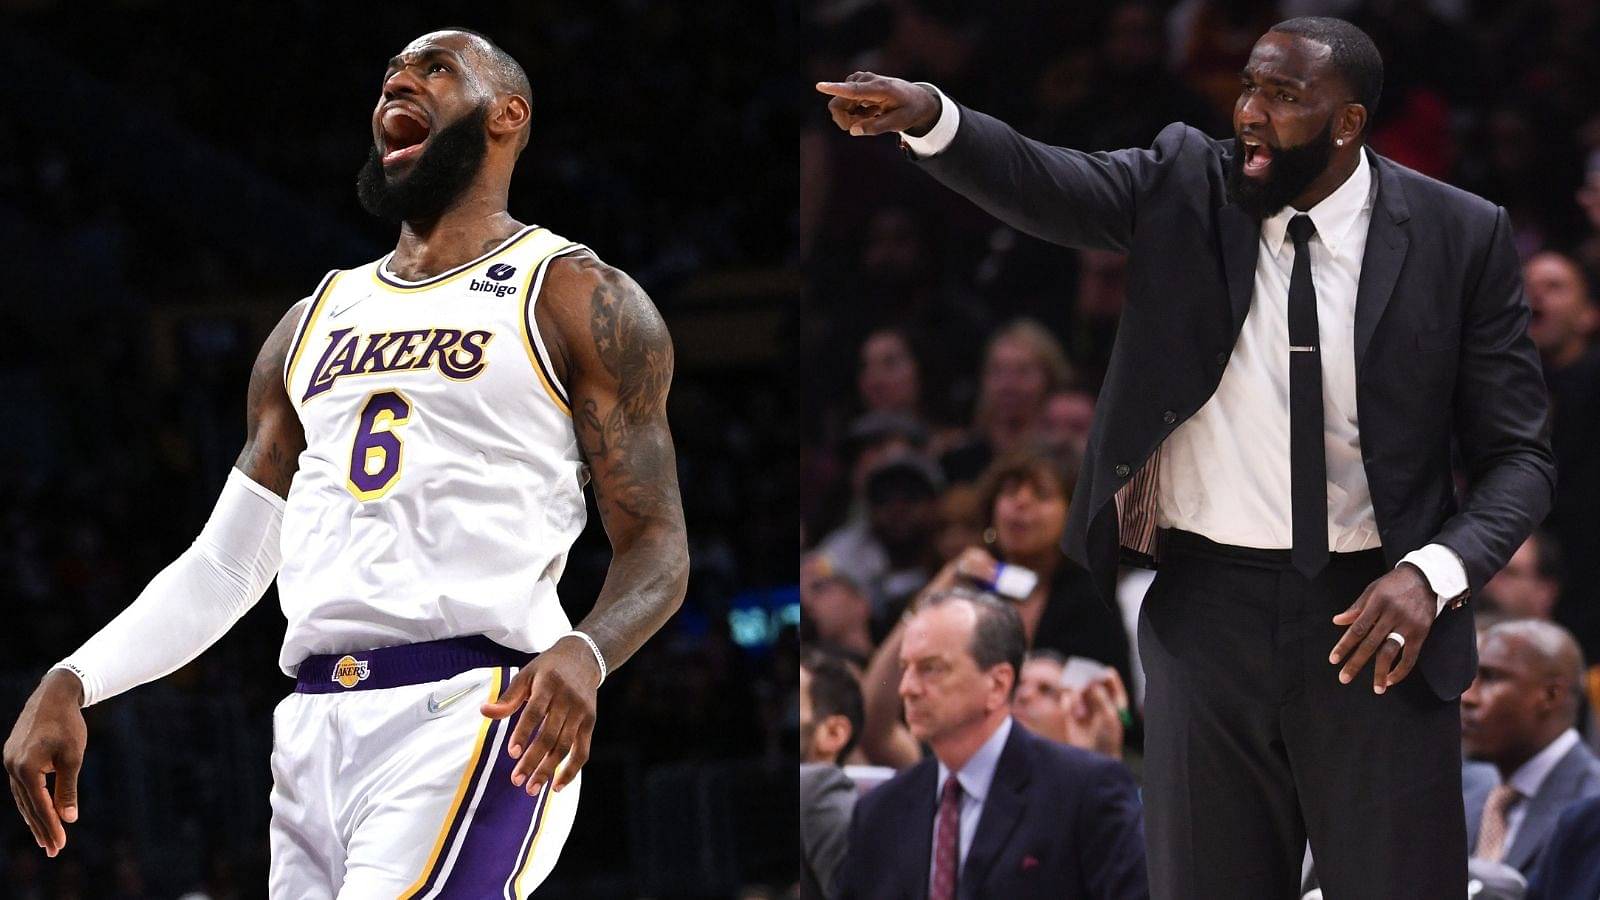 "Ain't NOBODY tryna see the Lakers on NATIONAL TV!": Kendrick Perkins re-iterates his statement about LeBron James and co after their disastrous performance against the Pelicans